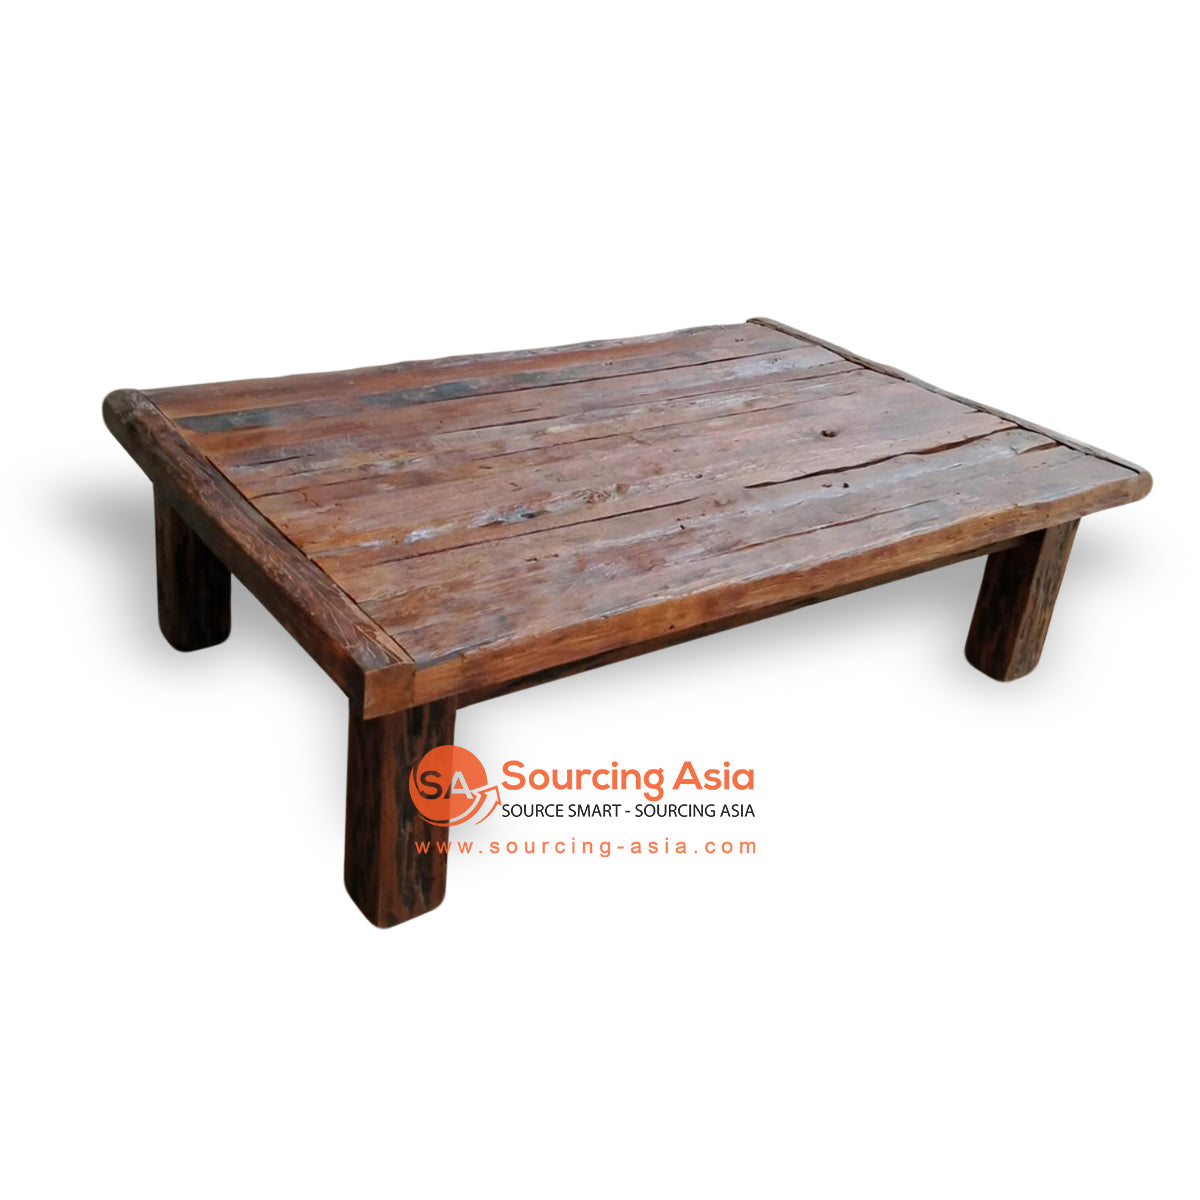 Ecl195 Natural Recycled Teak Wood Railway Sleeper Coffee Table Sourcing Asia